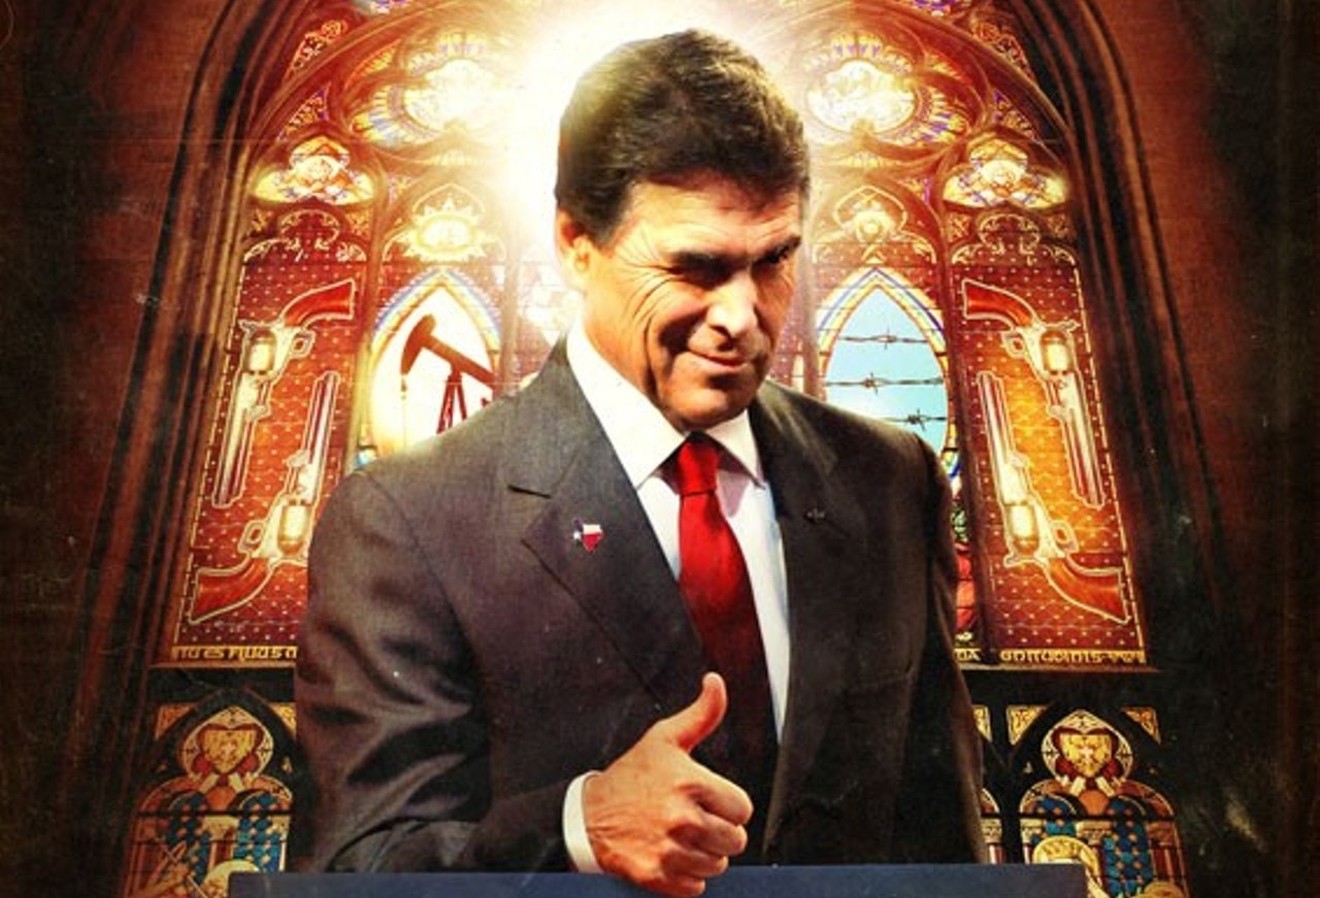 Rick Perry gets the deal done, even if it involves a tad of blasphemy.